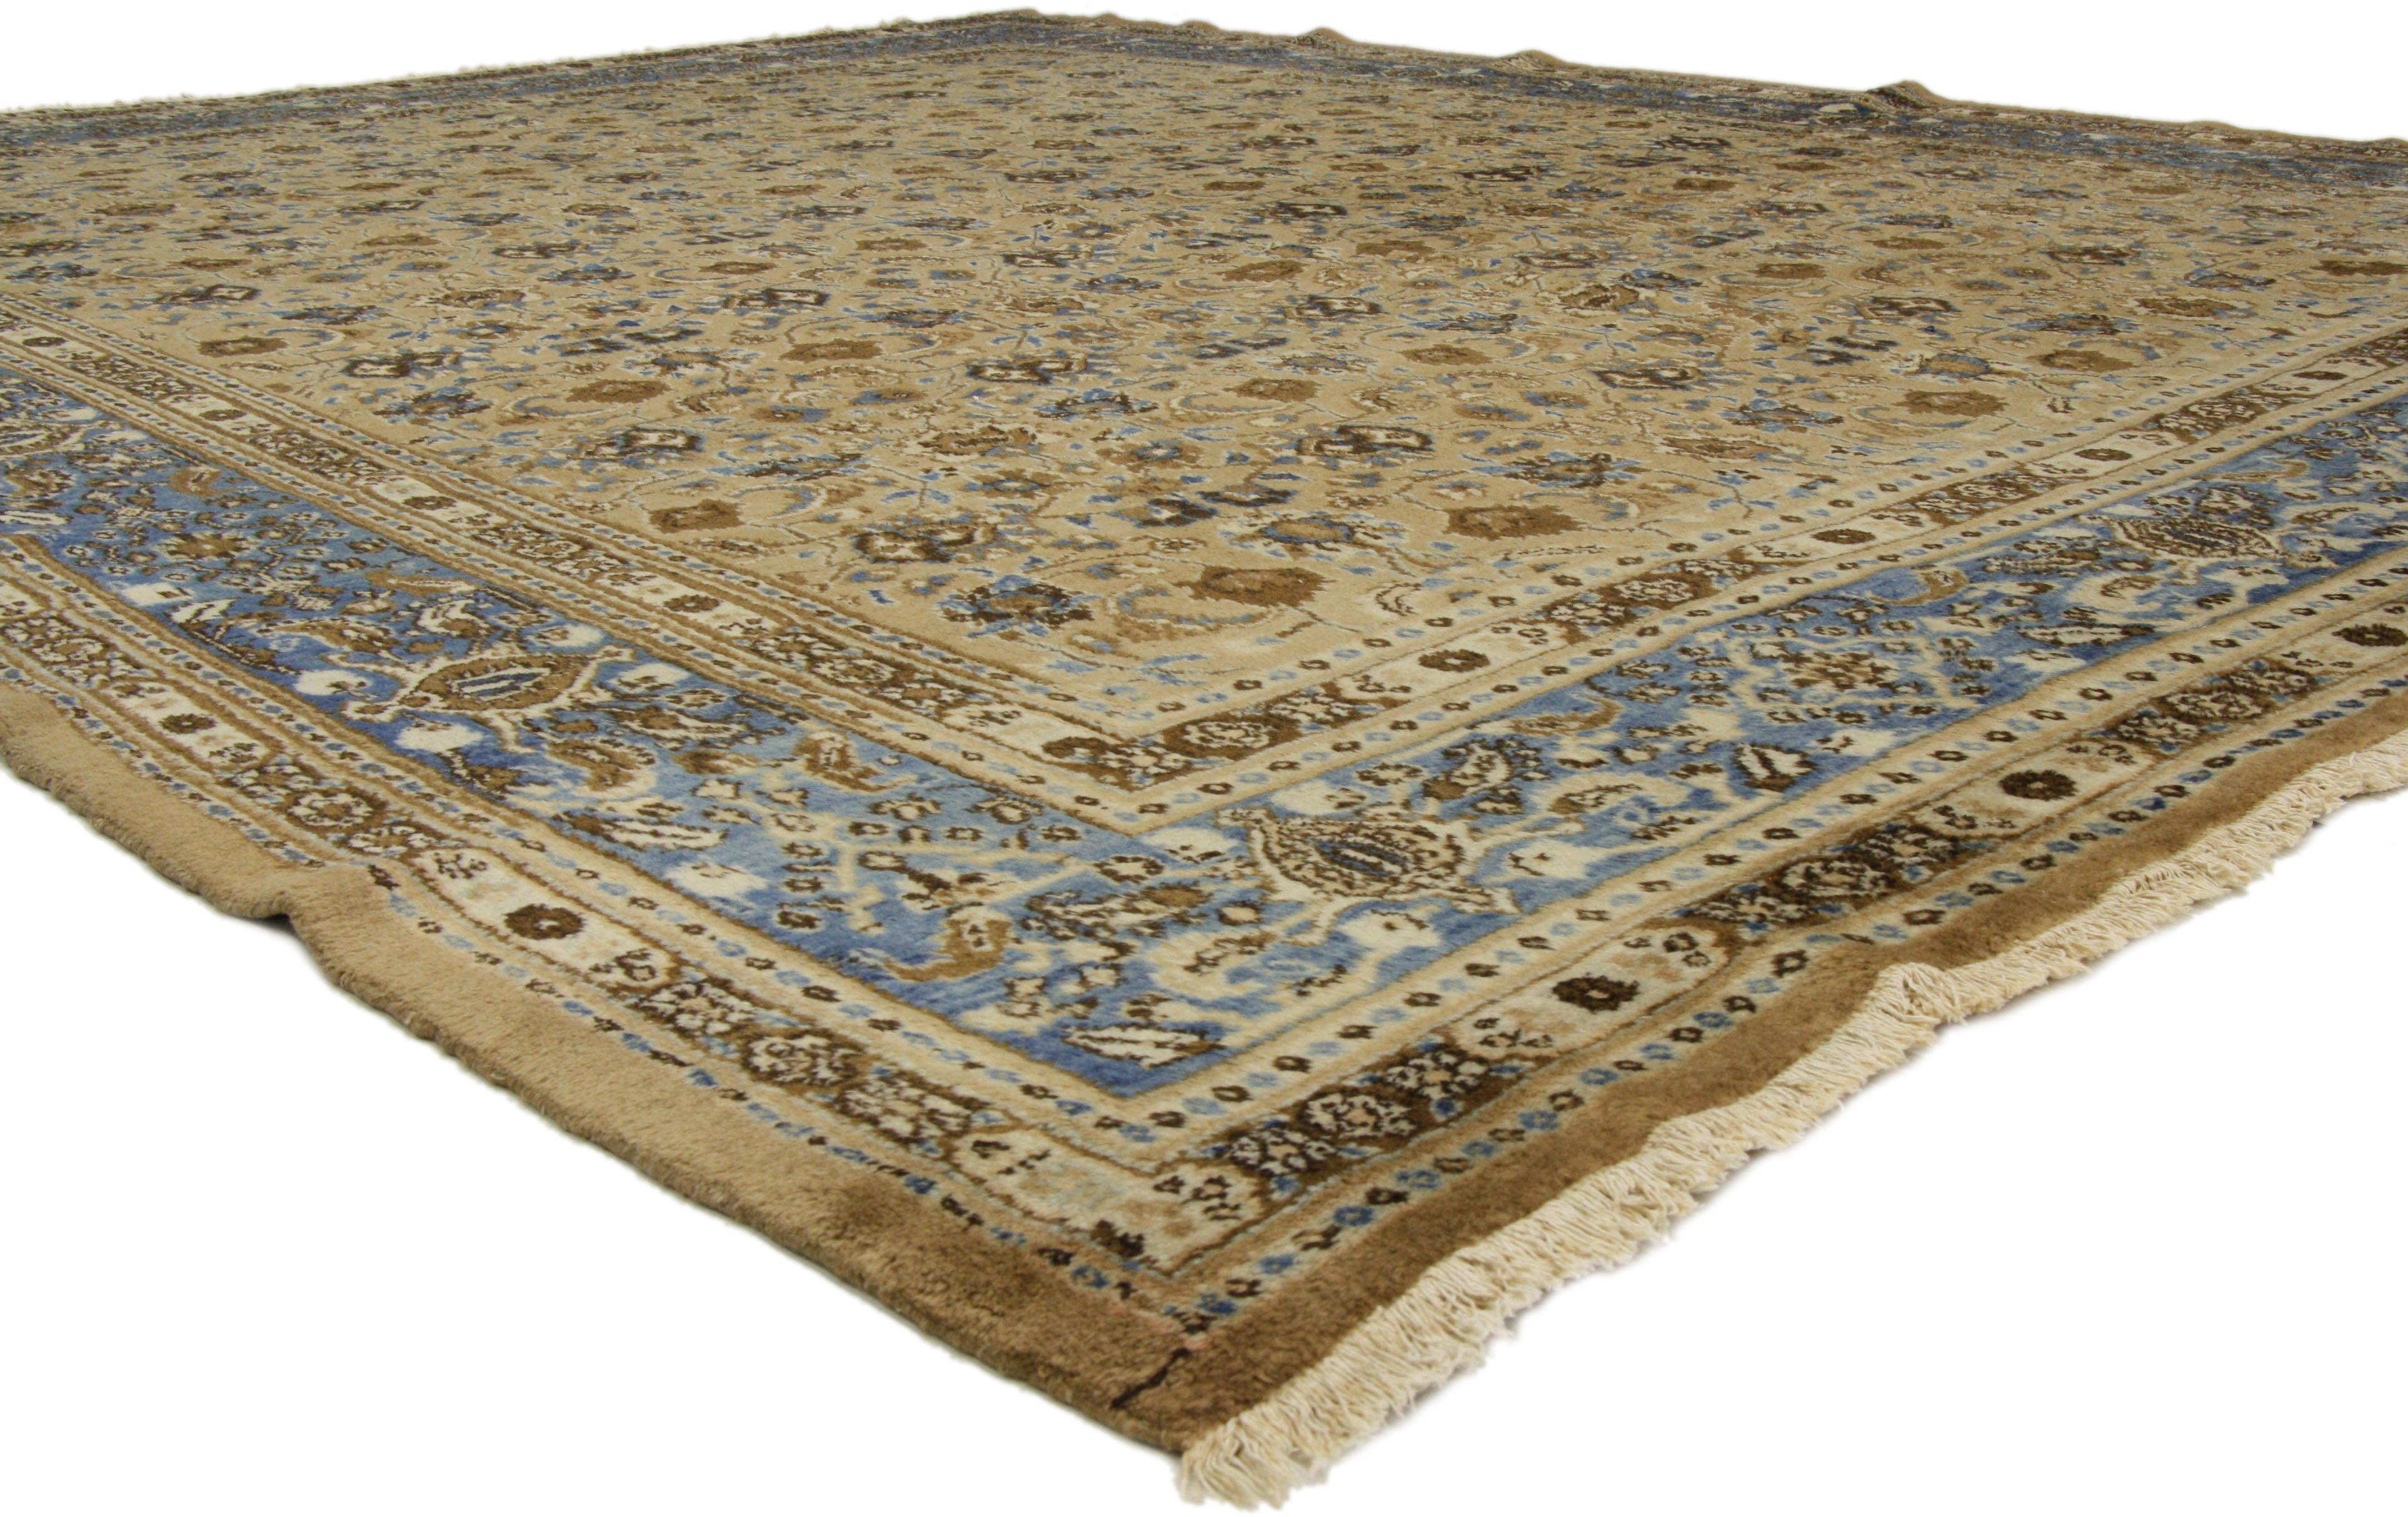 75600 Vintage Persian Birjand Area rug with Traditional style. This hand knotted wool vintage Persian Birjand area rug features an all-over Classic Herati design. The all-over Herati pattern is among the most widespread and well known of all Persian